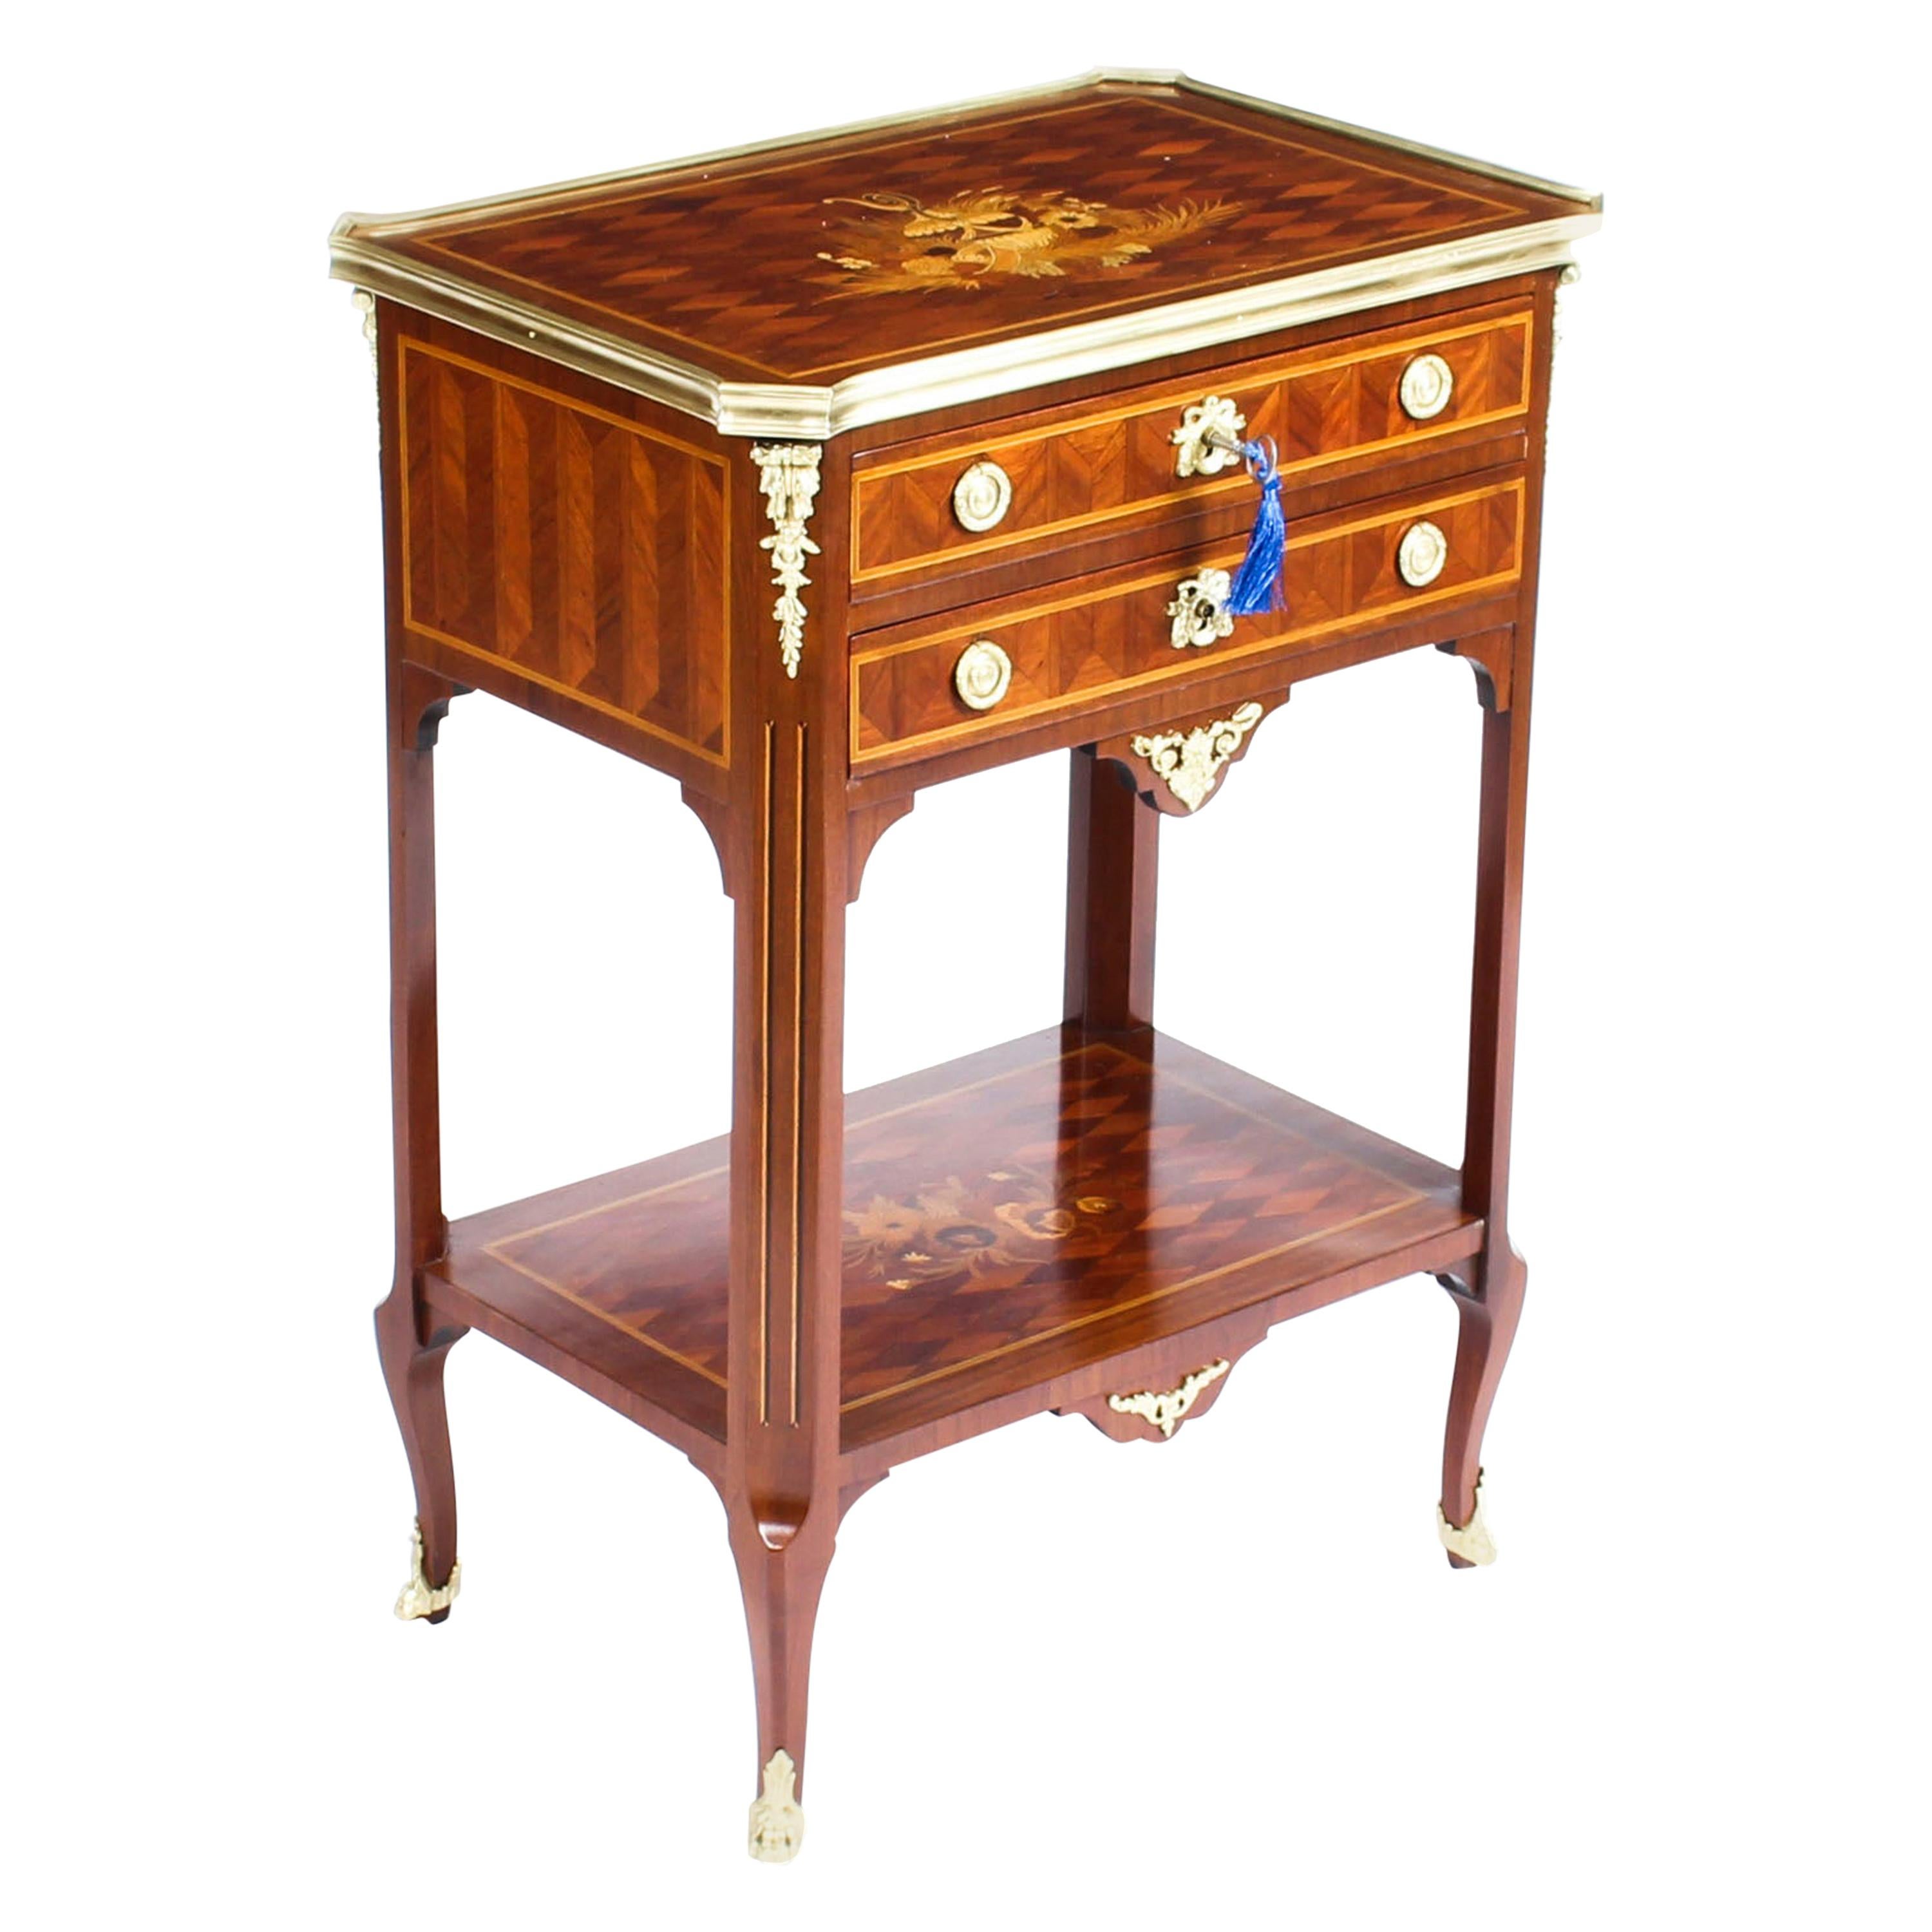 French Parquetry and Marquetry Table En Chiffonière Work Table, 19th Century For Sale